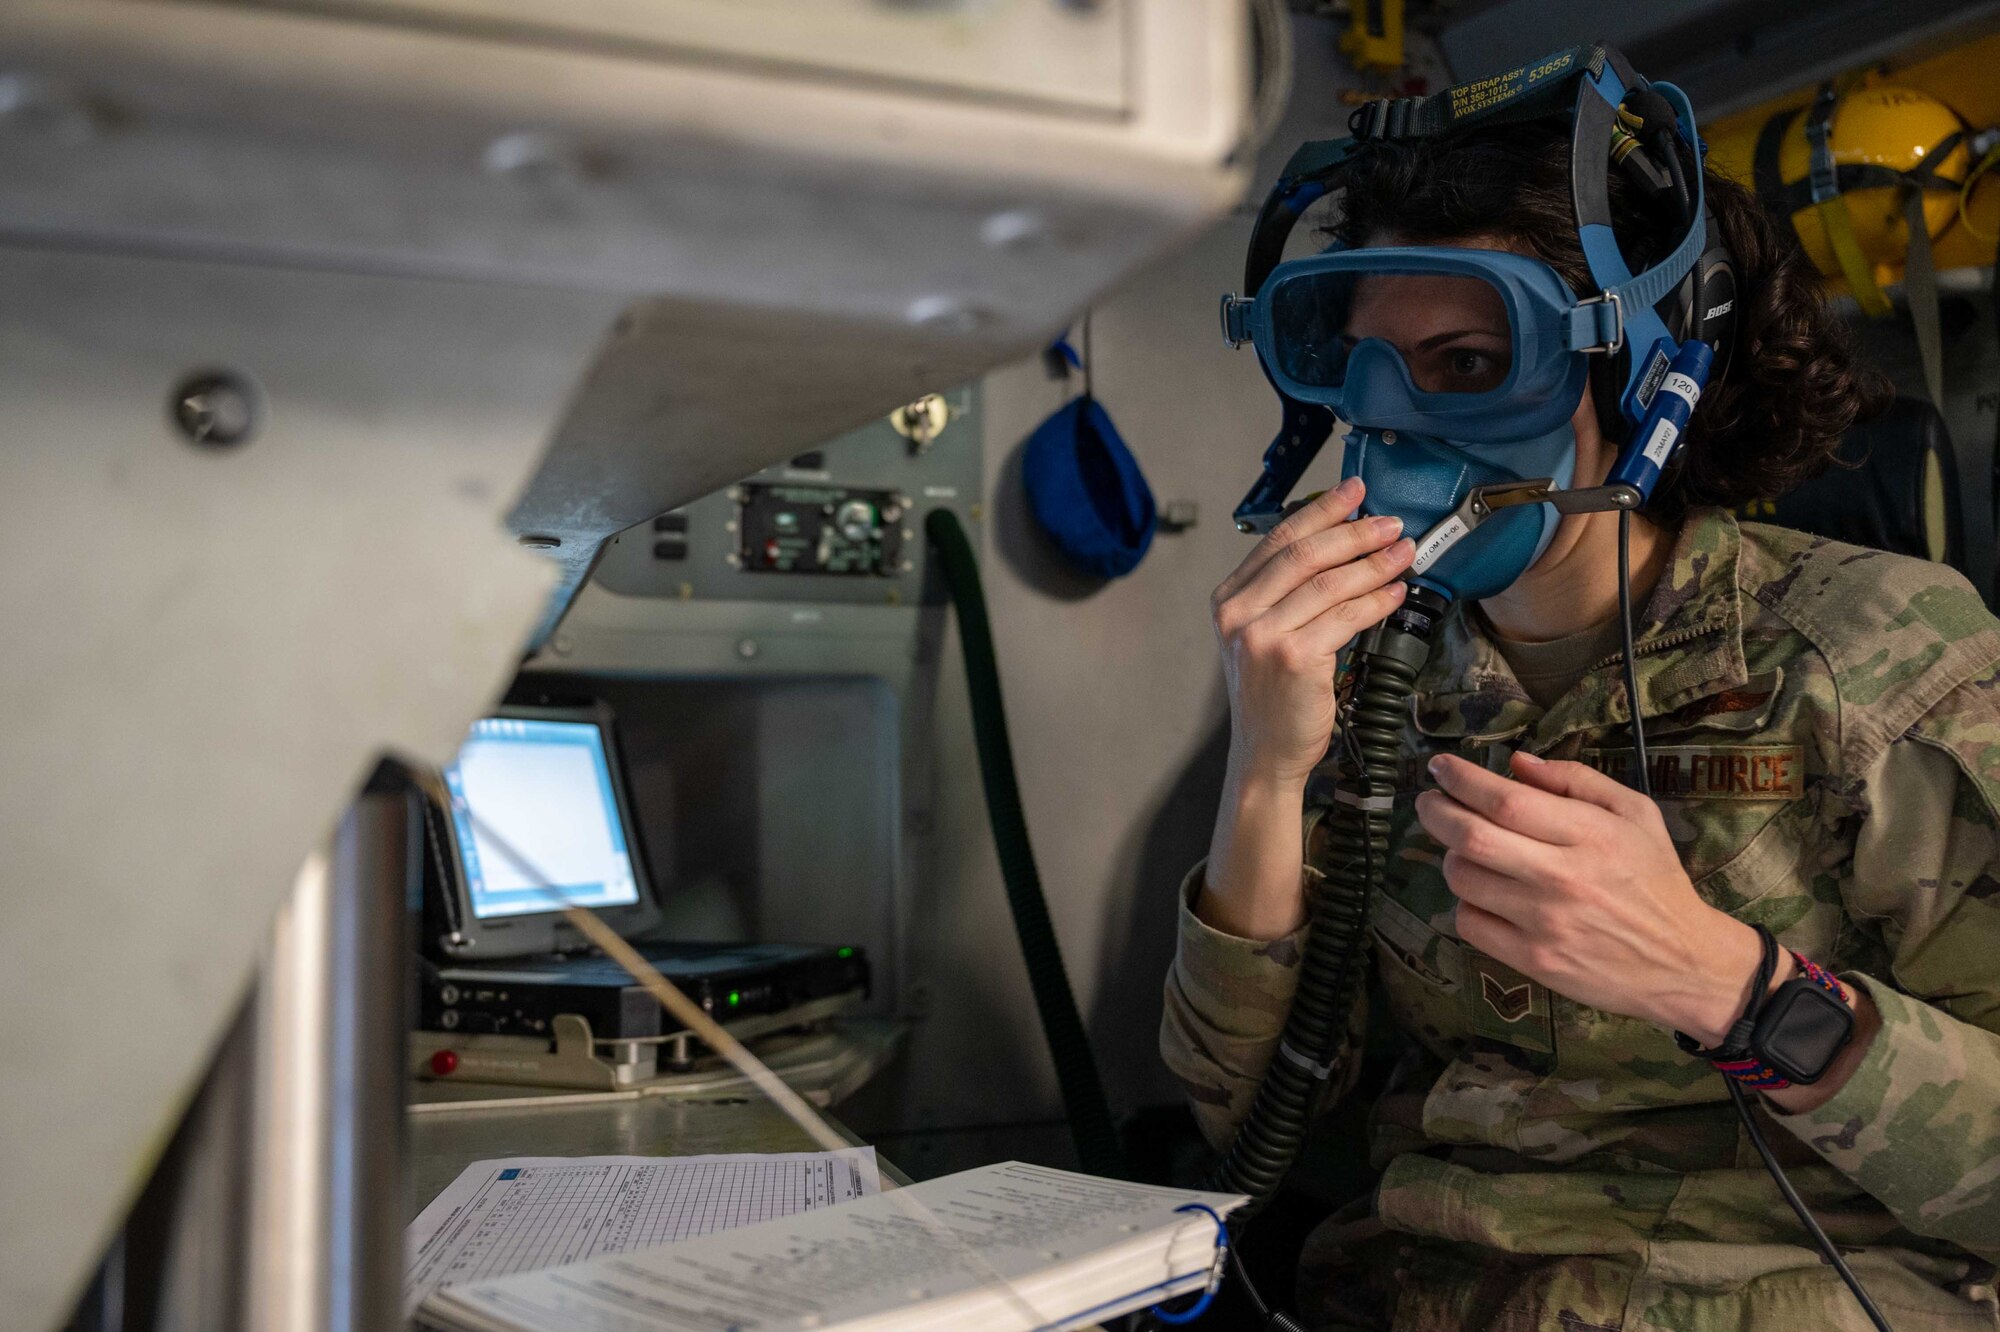 Staff Sgt. Tracey Kolb, 3rd Airlift Squadron loadmaster, tests an oxygen mask on a C-17 Globemaster III before a local training flight at Dover Air Force Base, Delaware, April 22, 2021. The 3rd AS trains to support global engagement through direct delivery of critical theater assets and to ensure combat readiness of Air Mobility Command C-17 aircrews. (U.S. Air Force photo by Airman 1st Class Faith Schaefer)